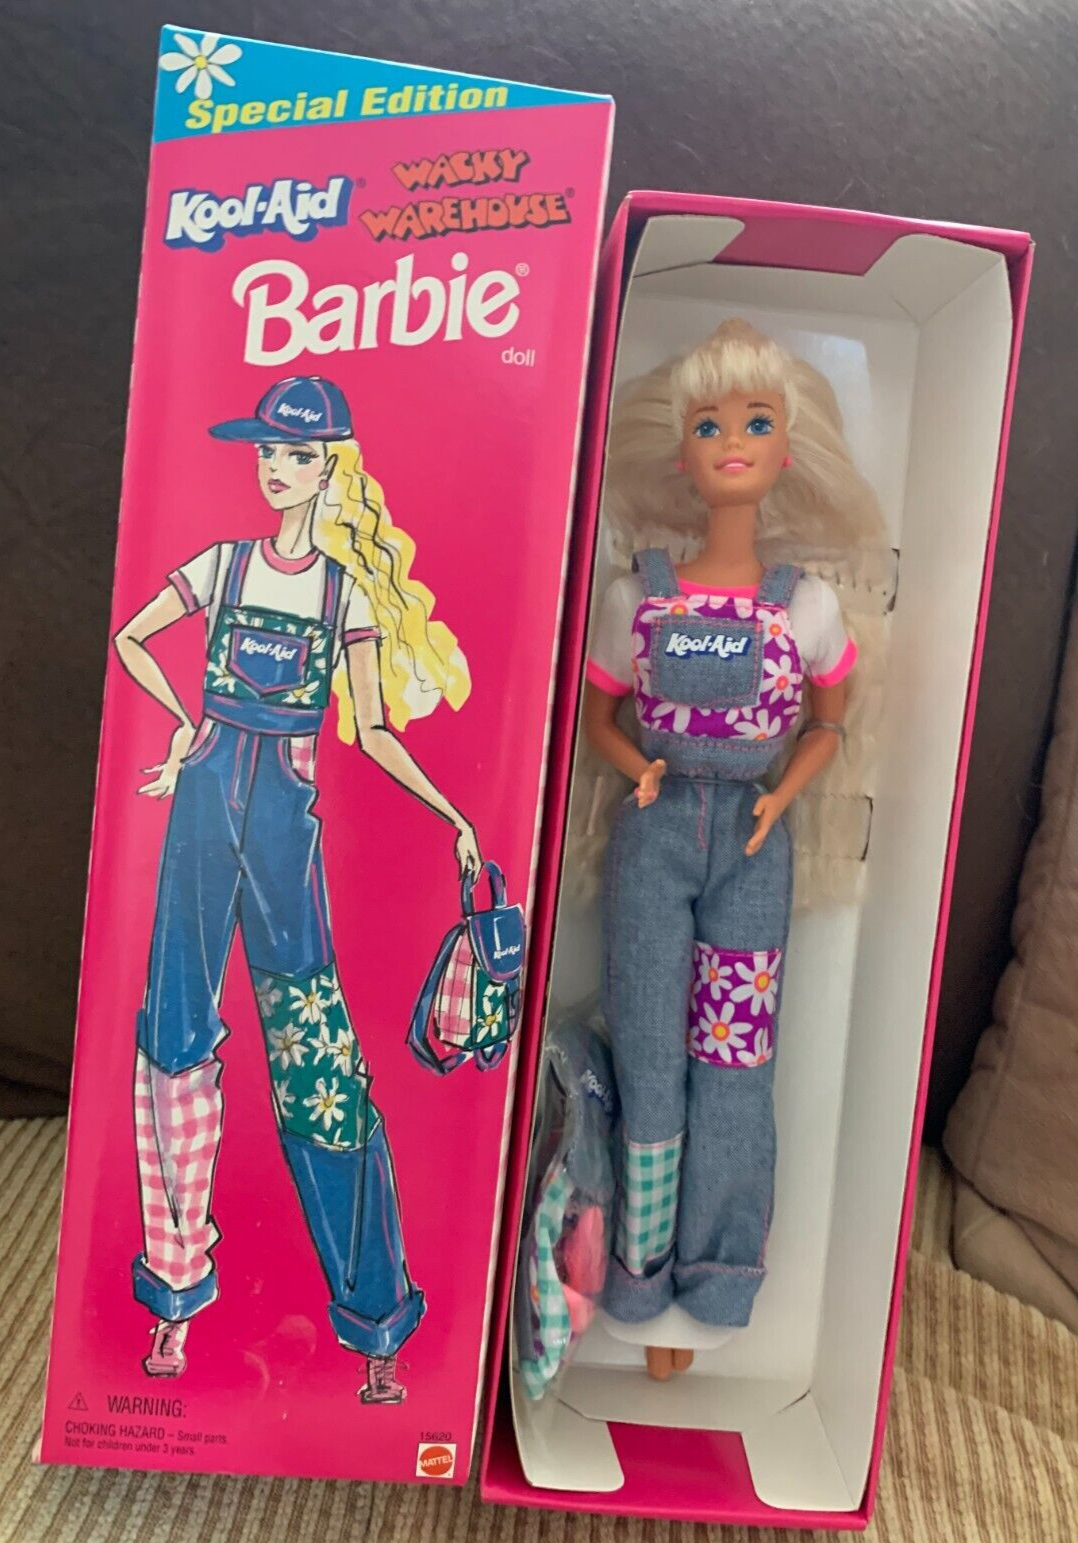 Amazon.com: Butterfly Art Barbie Doll : Toys & Games